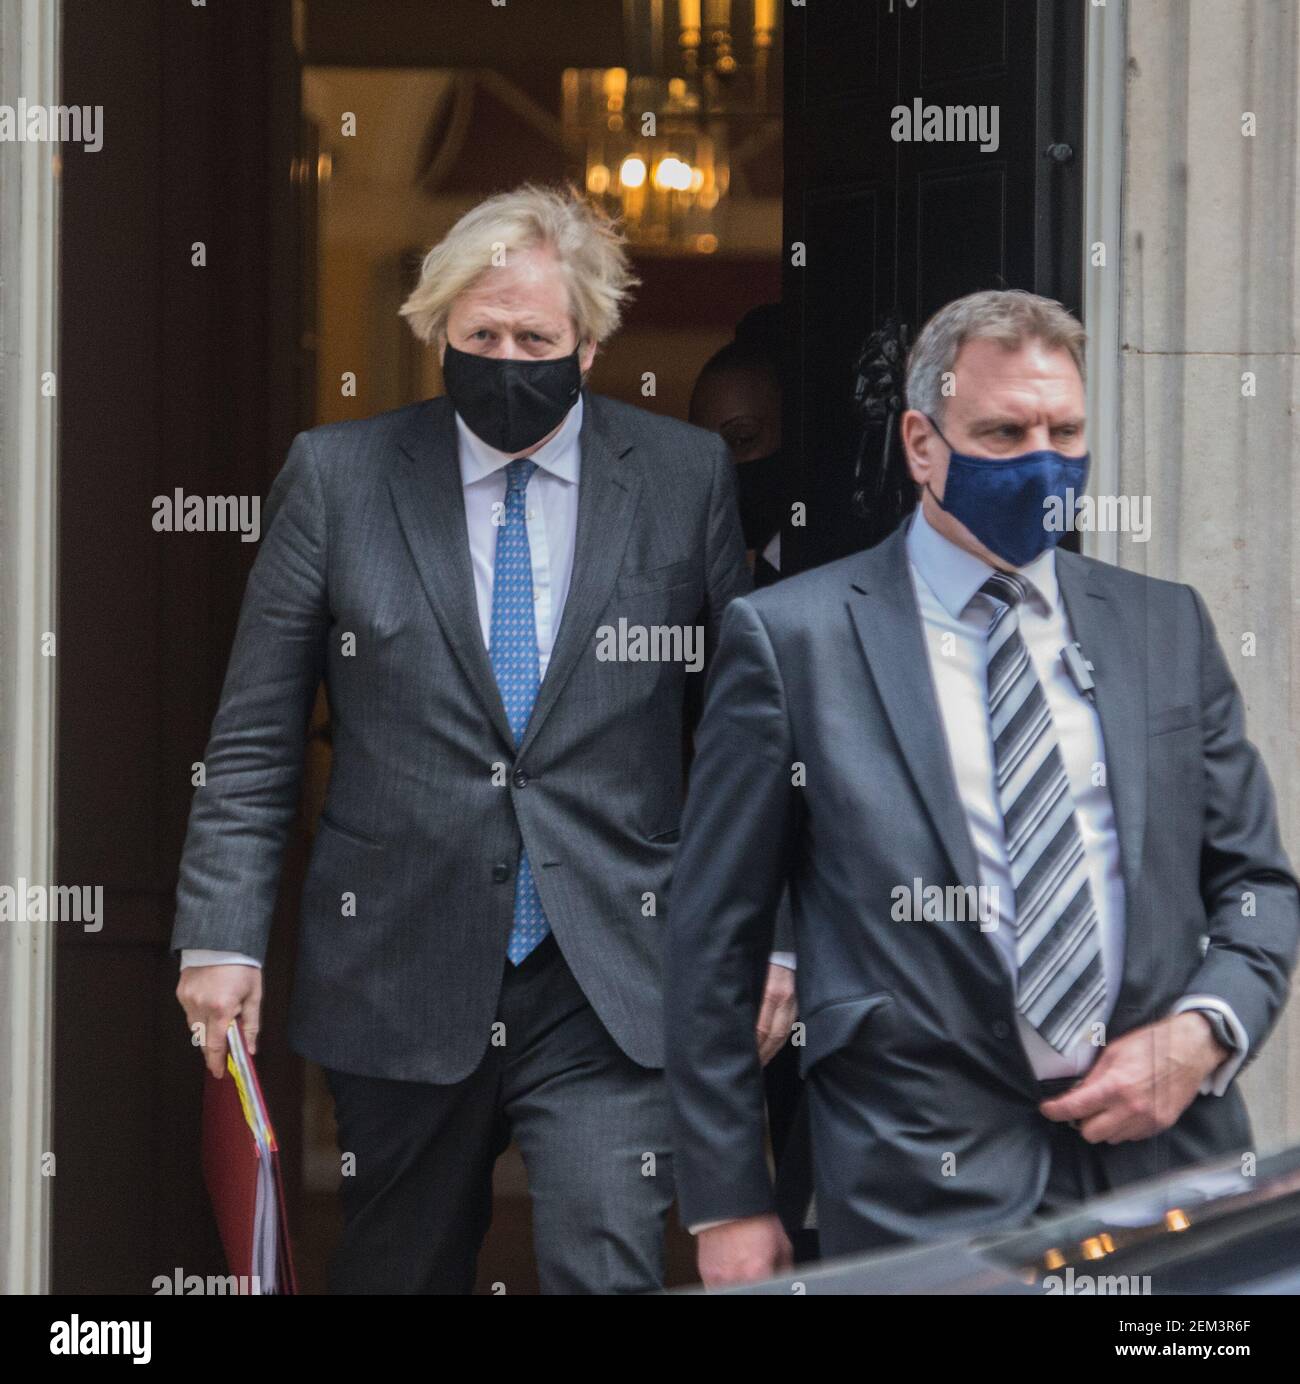 London UK 24 February 2021 The prime minister Boris Johnson leaving 10 Downing Street to attend the PM questions, showing is newly hair trim done by his Girlfriend Carrie Symonds.Paul  Quezada-Neiman/Alamy Live News Stock Photo